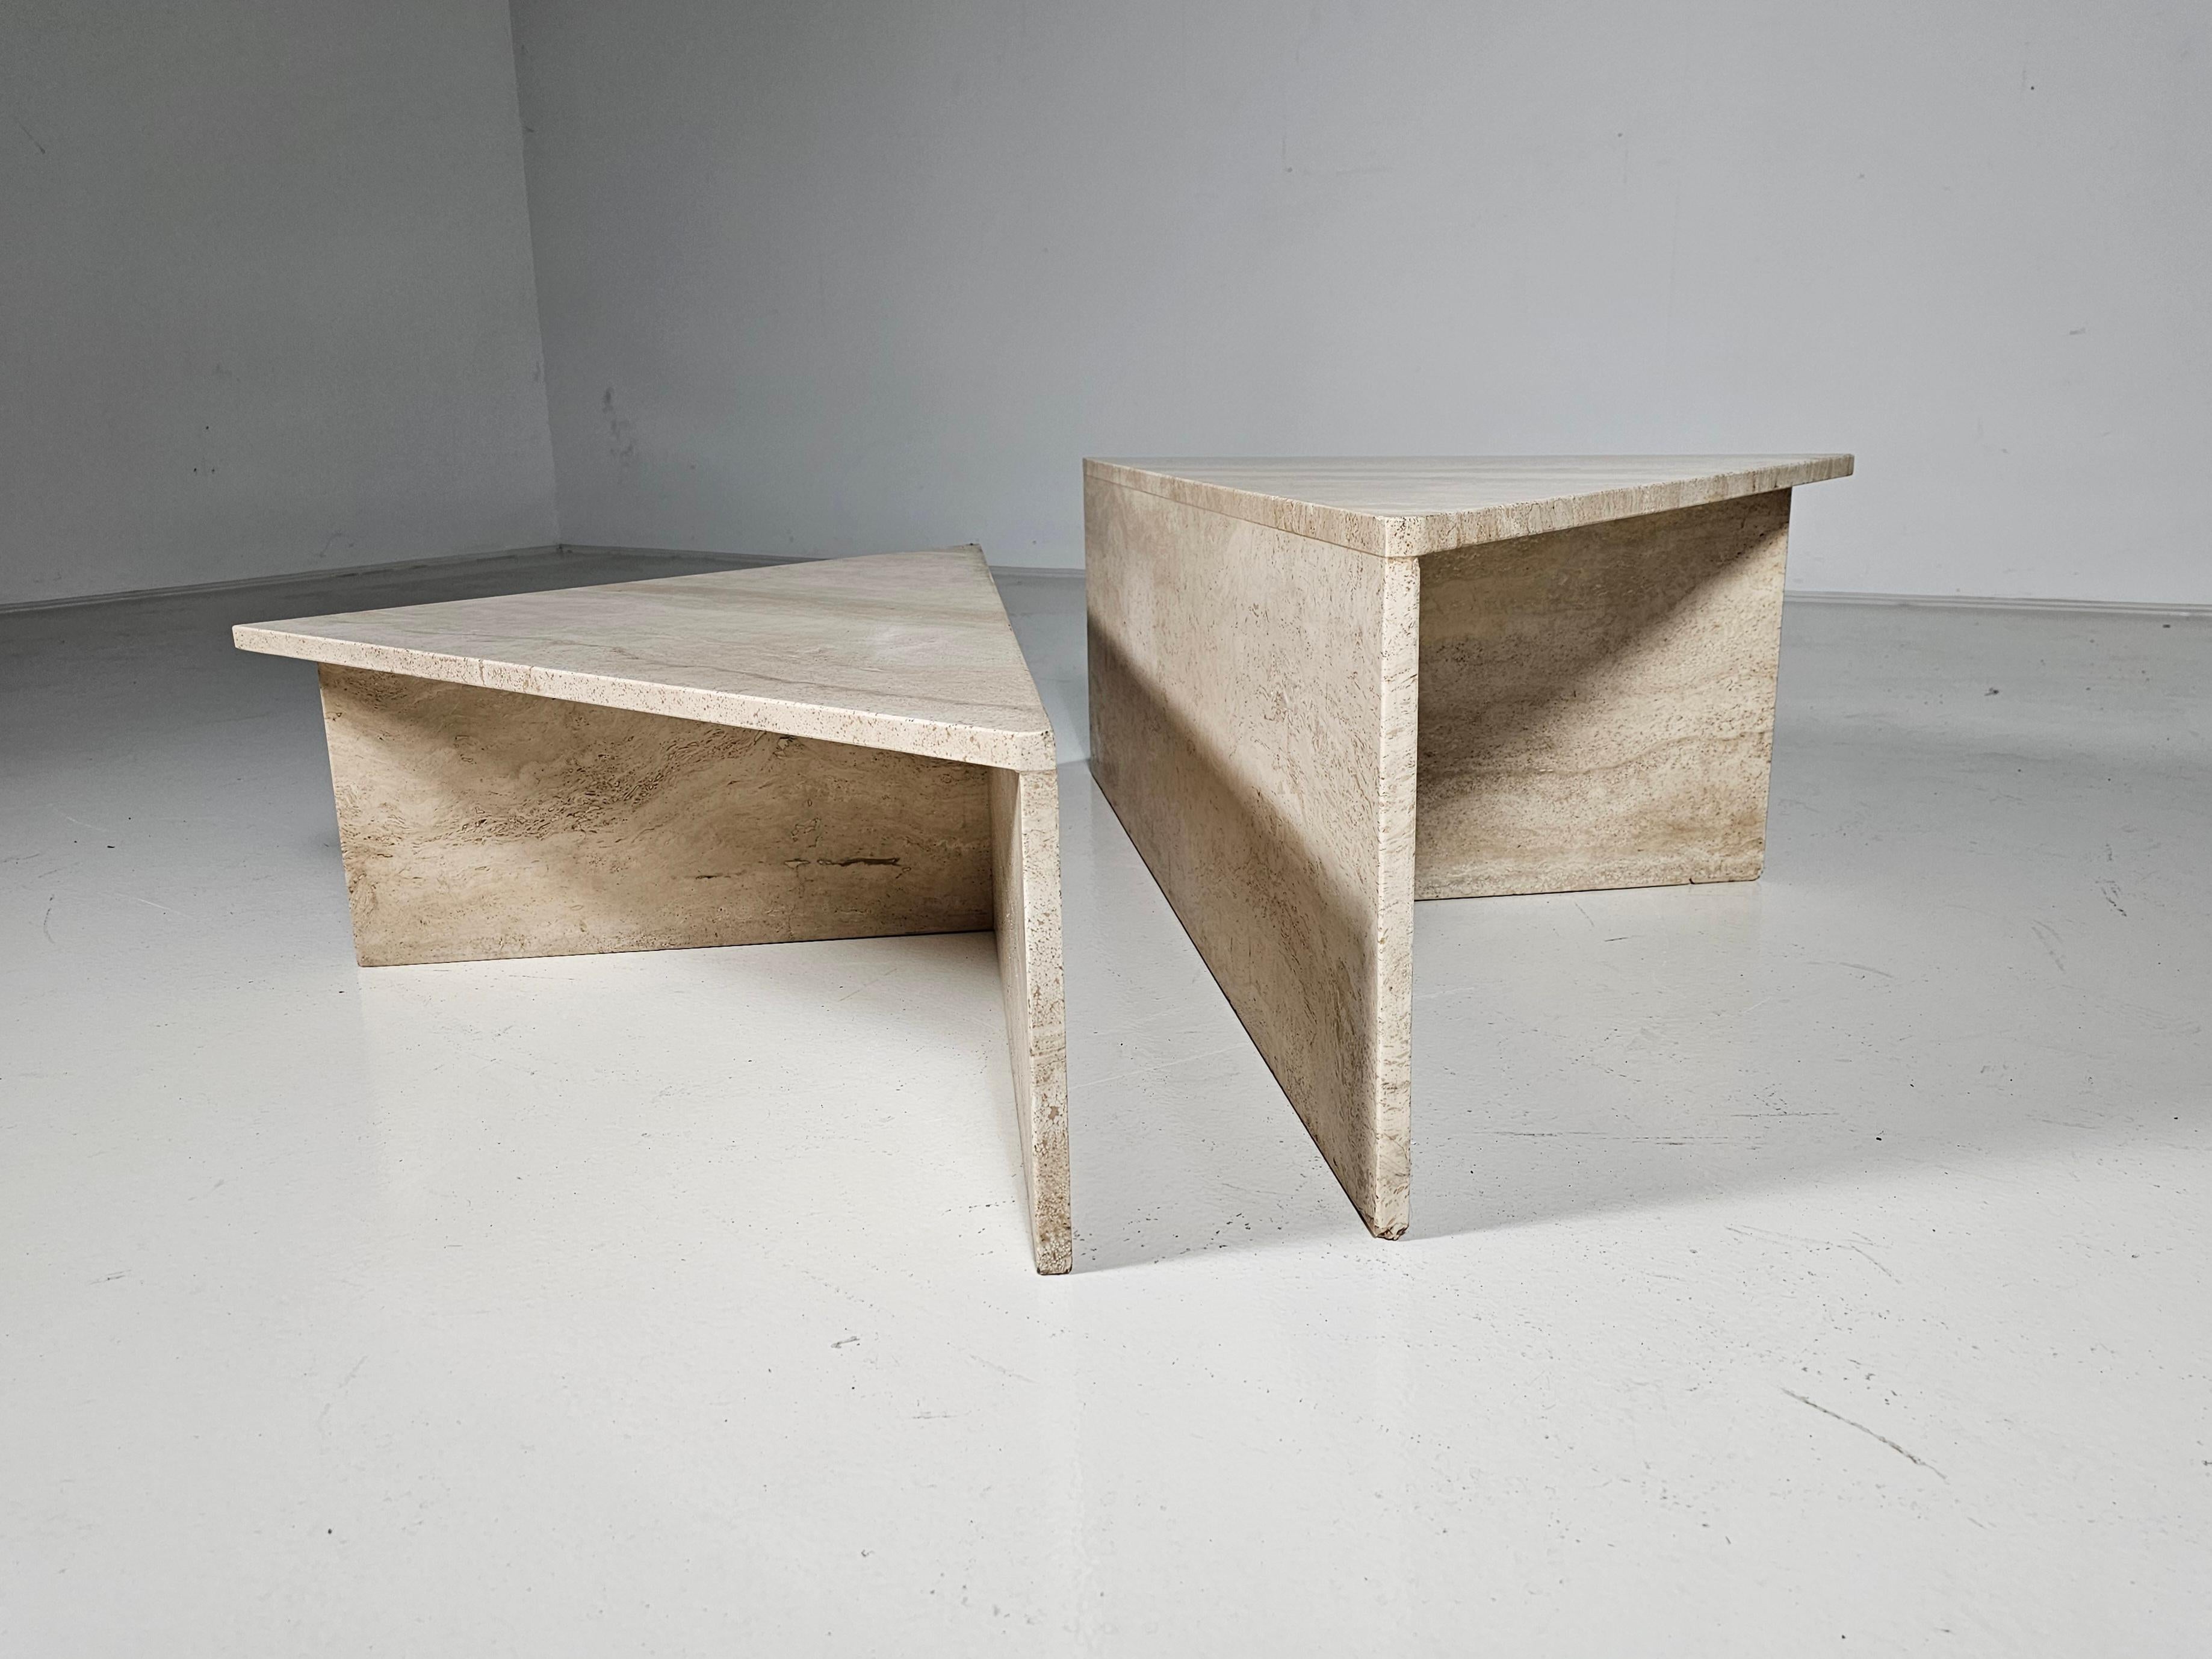 Two Part Travertine Modular Coffee Table by Up & Up, circa 1970s For Sale 2